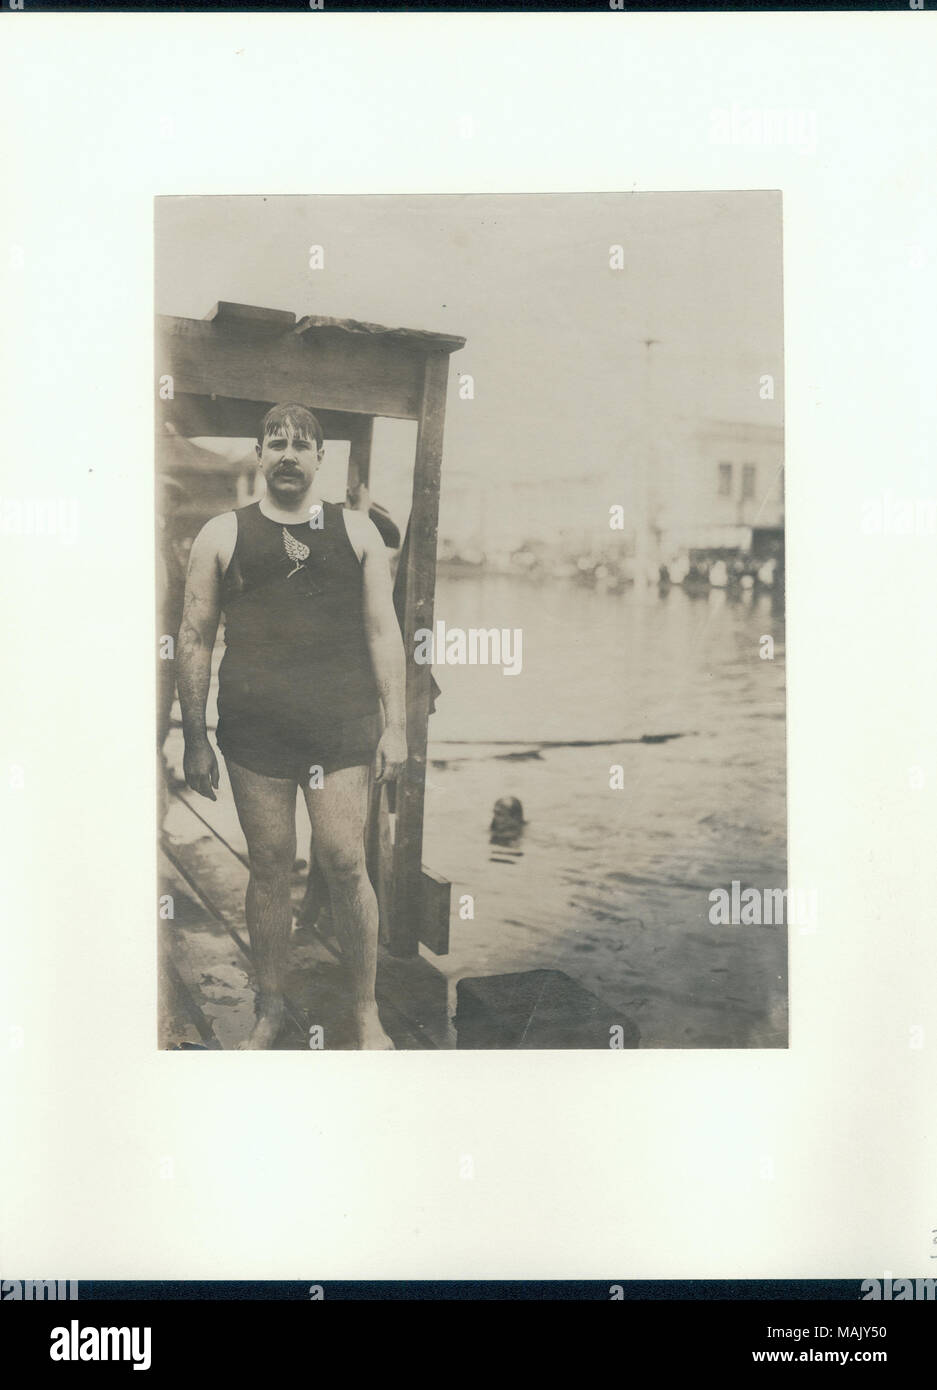 Wet man in a swimsuit standing on a wooden dock beside a small lake with a man swimming. Title: W.E. Dickey of the New York Athletic Club, as the Plunge for Distance champion at the 1904 Olympics.  . 1904. Stock Photo